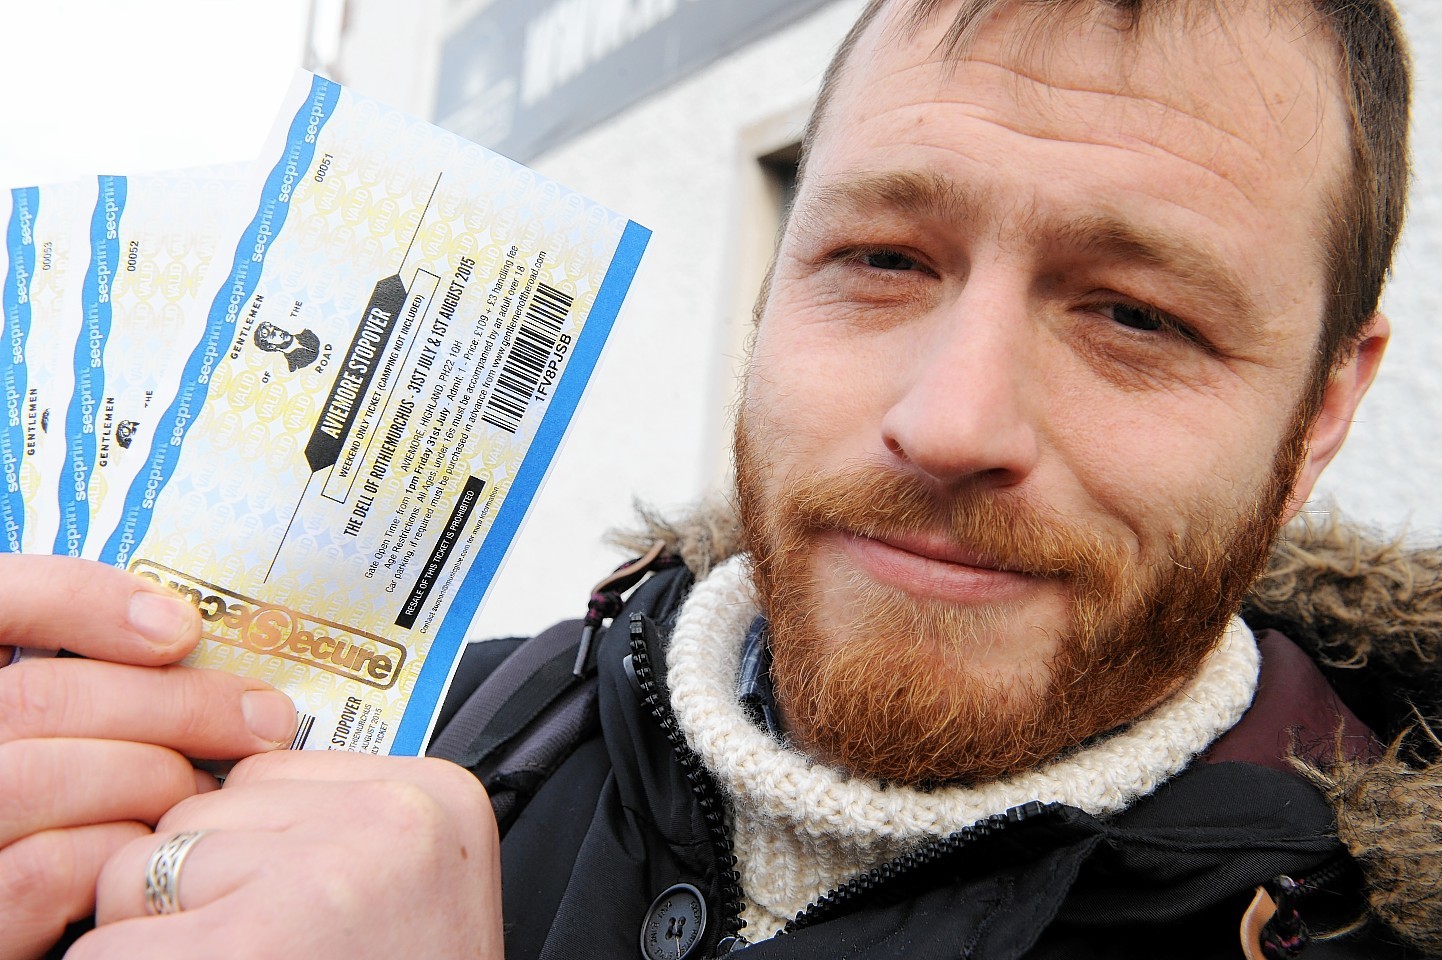 Ben Kerr was first to get his hands on tickets 